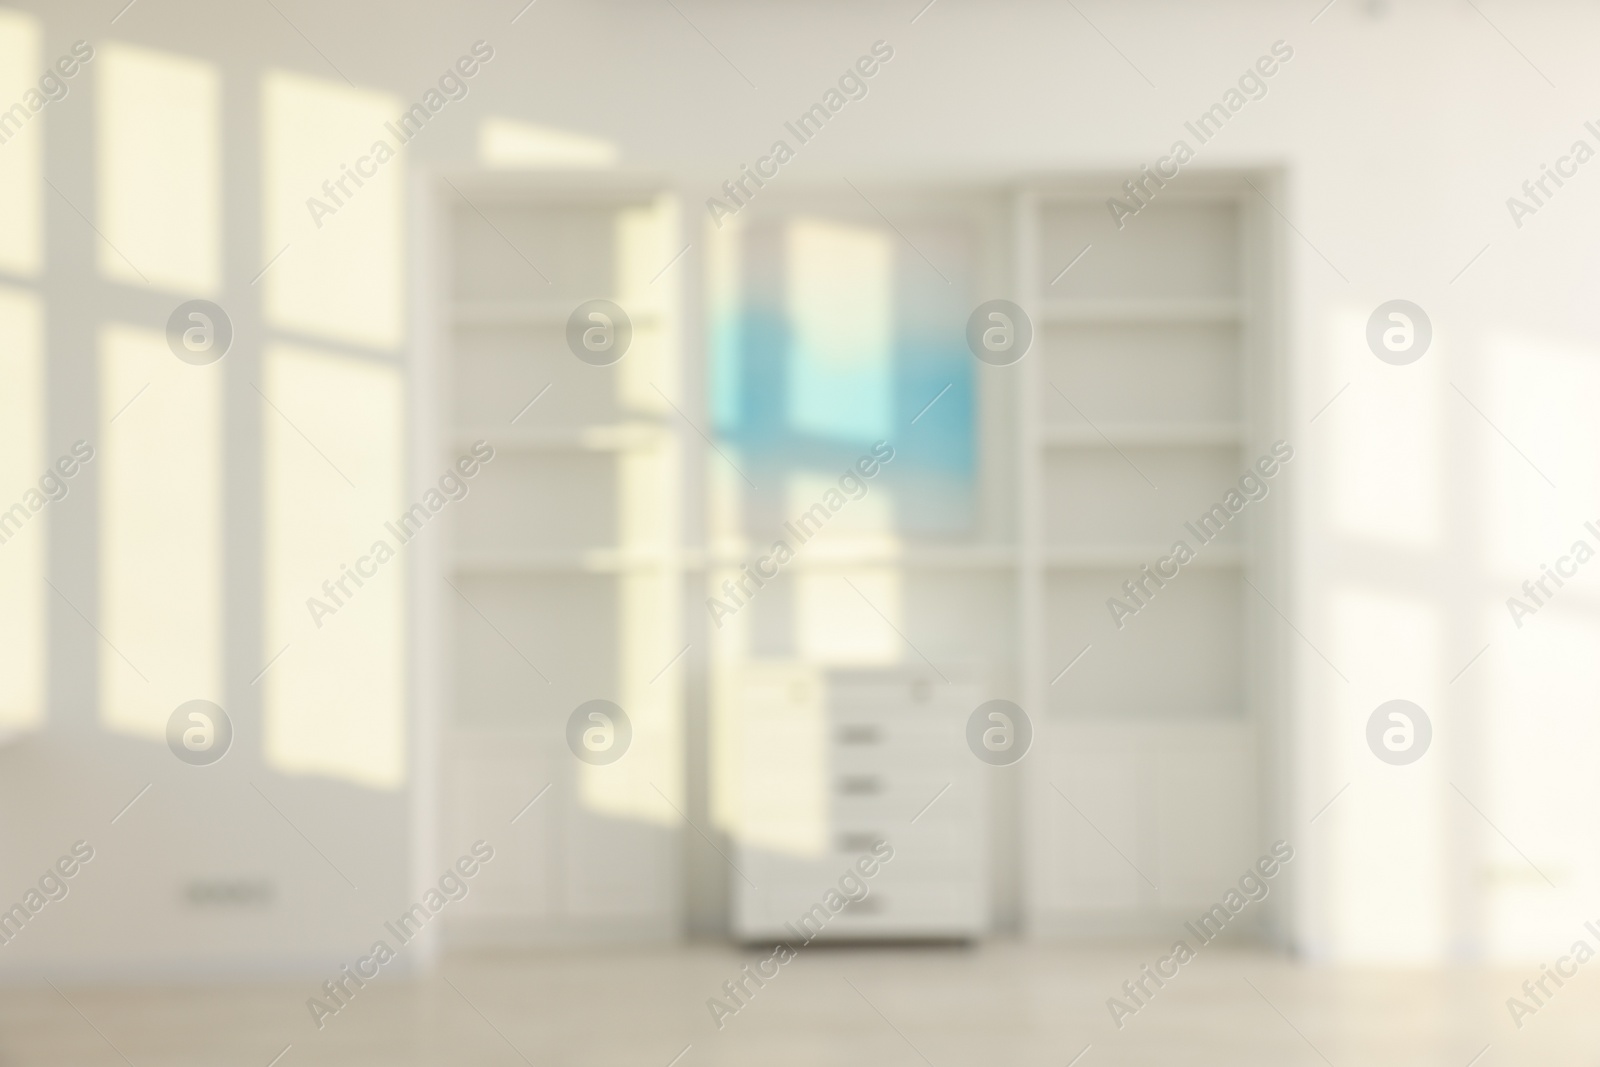 Photo of Blurred view of room with shelving unit and shadows on wall